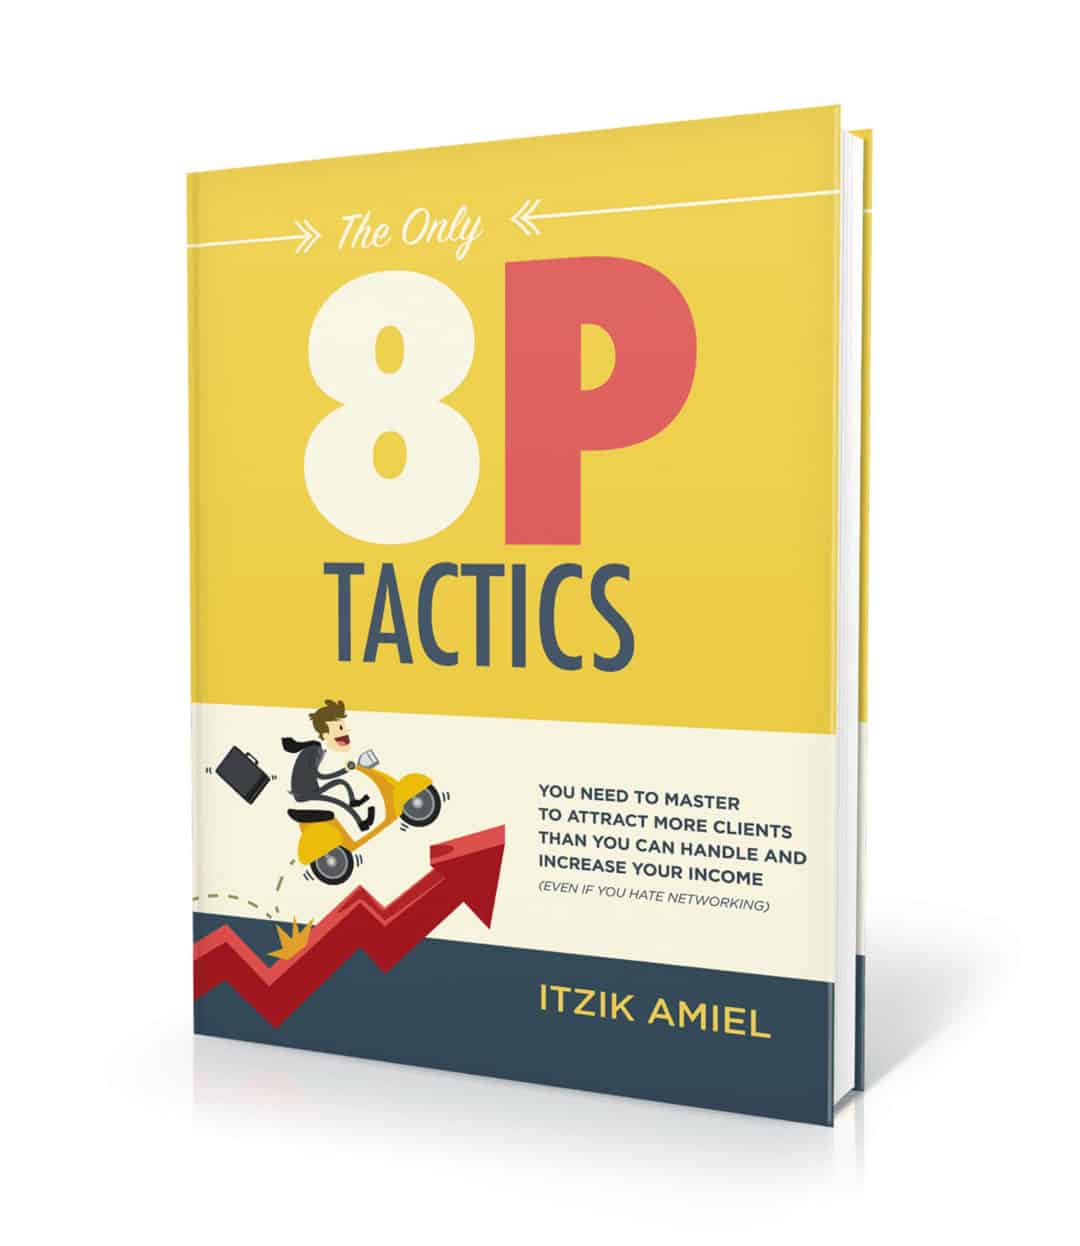 image of a book about The Only 8P Tactics by Itzik Amiel